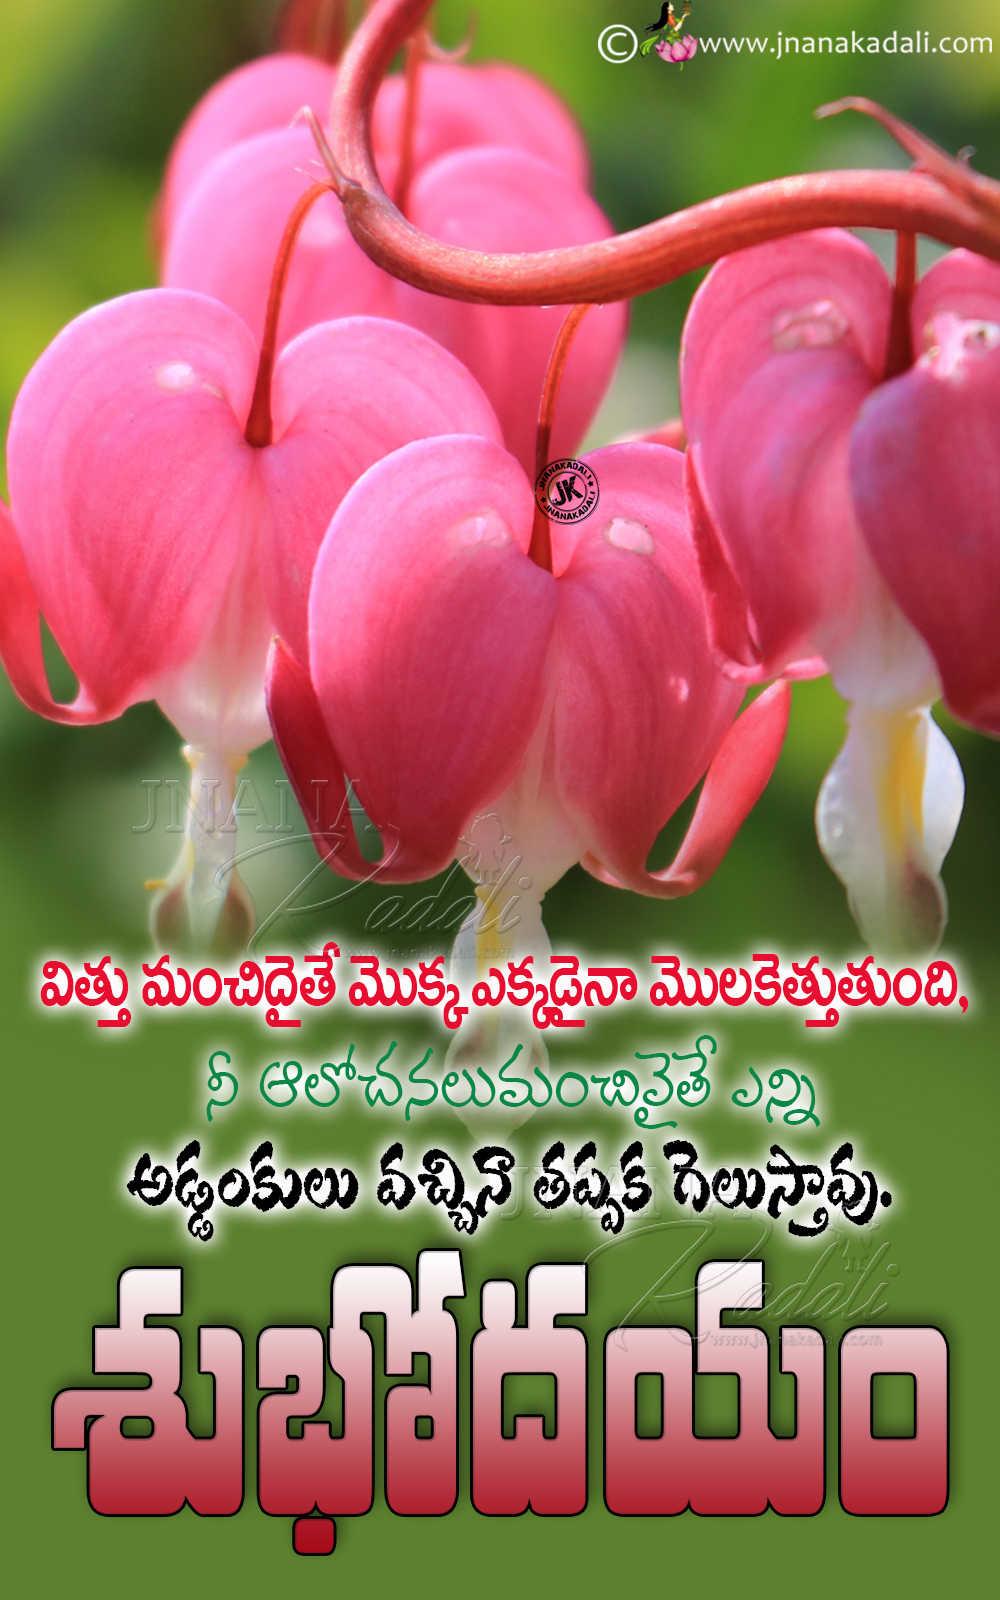 Nice Telugu Subhodayam Greetings with Moral Value Quotes free ...